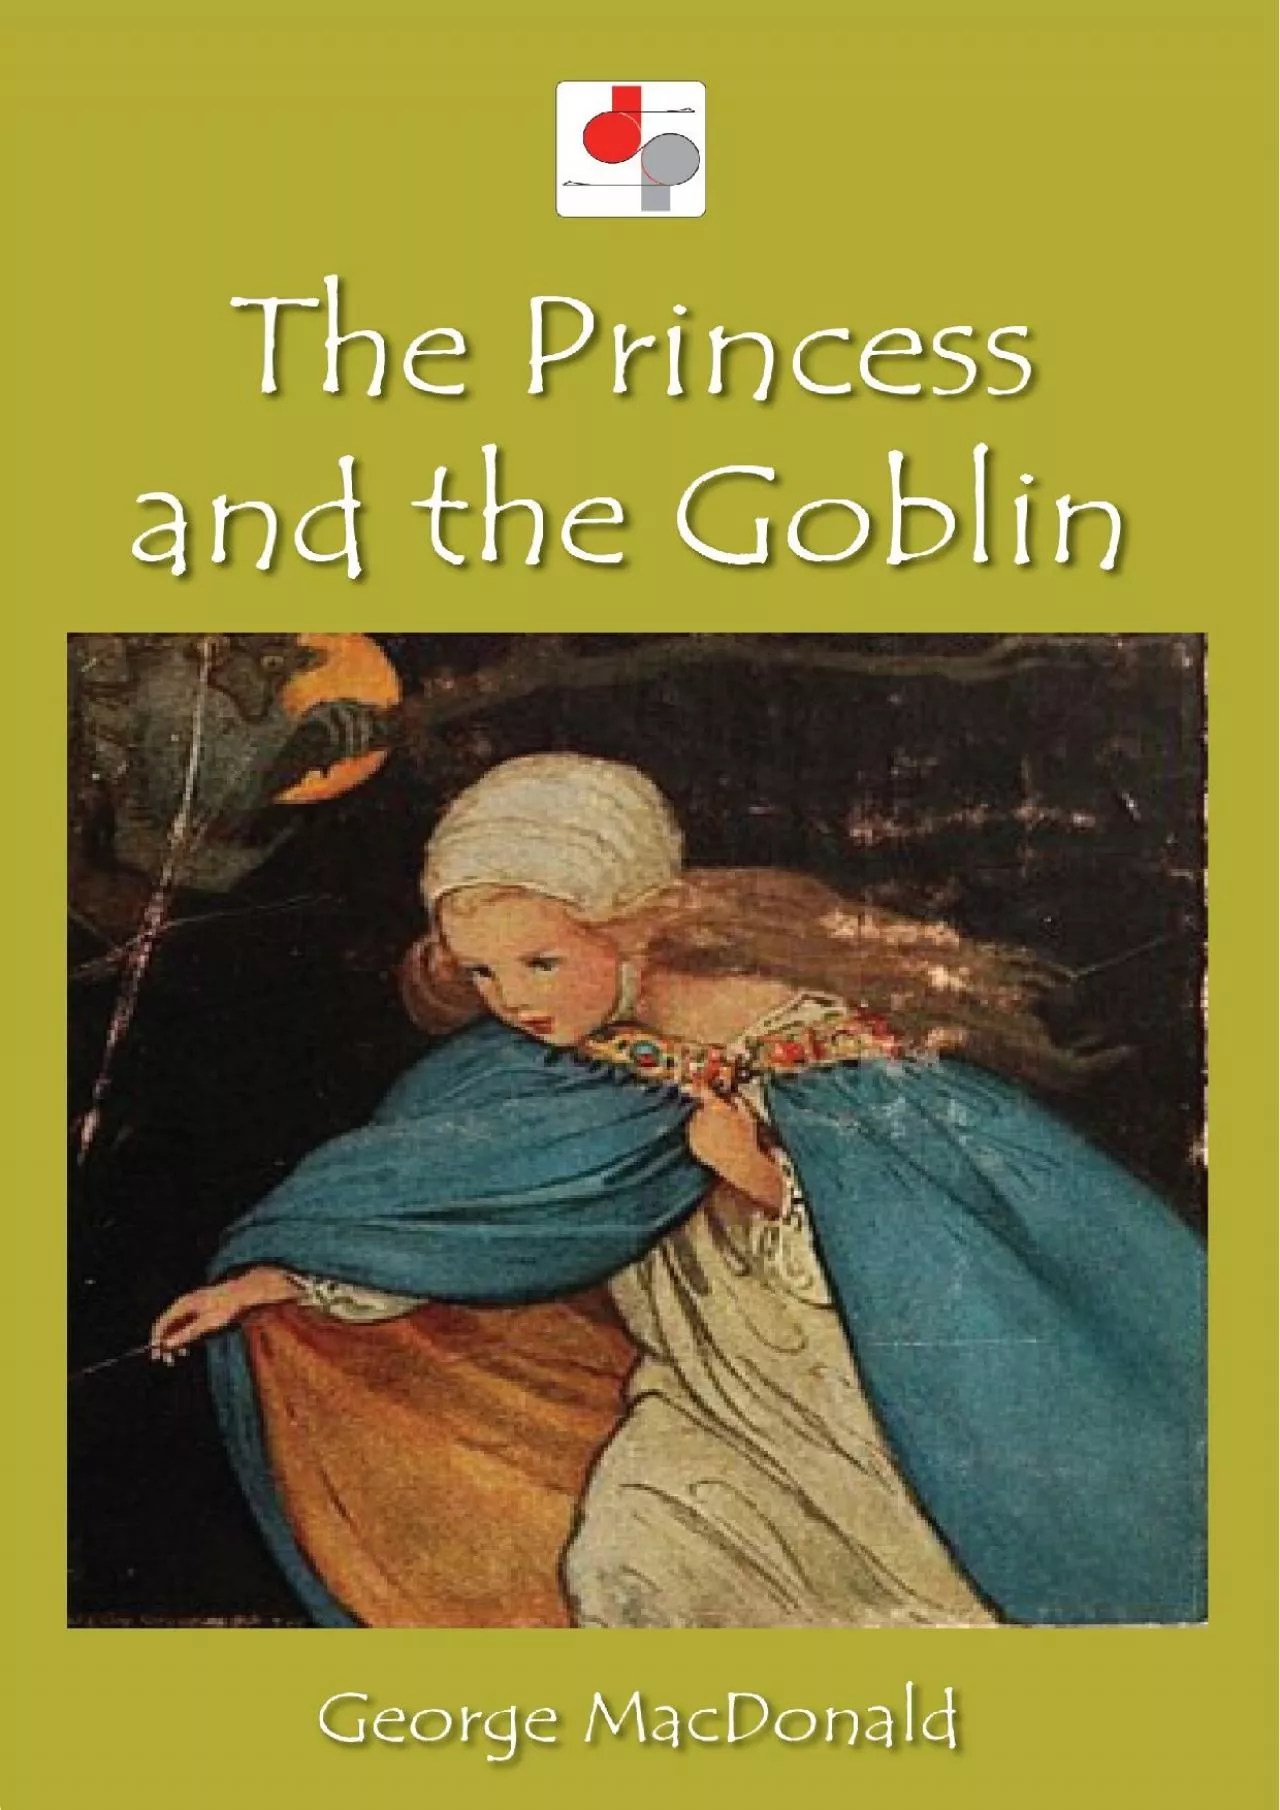 (EBOOK)-The Princess and the Goblin (Illustrated)